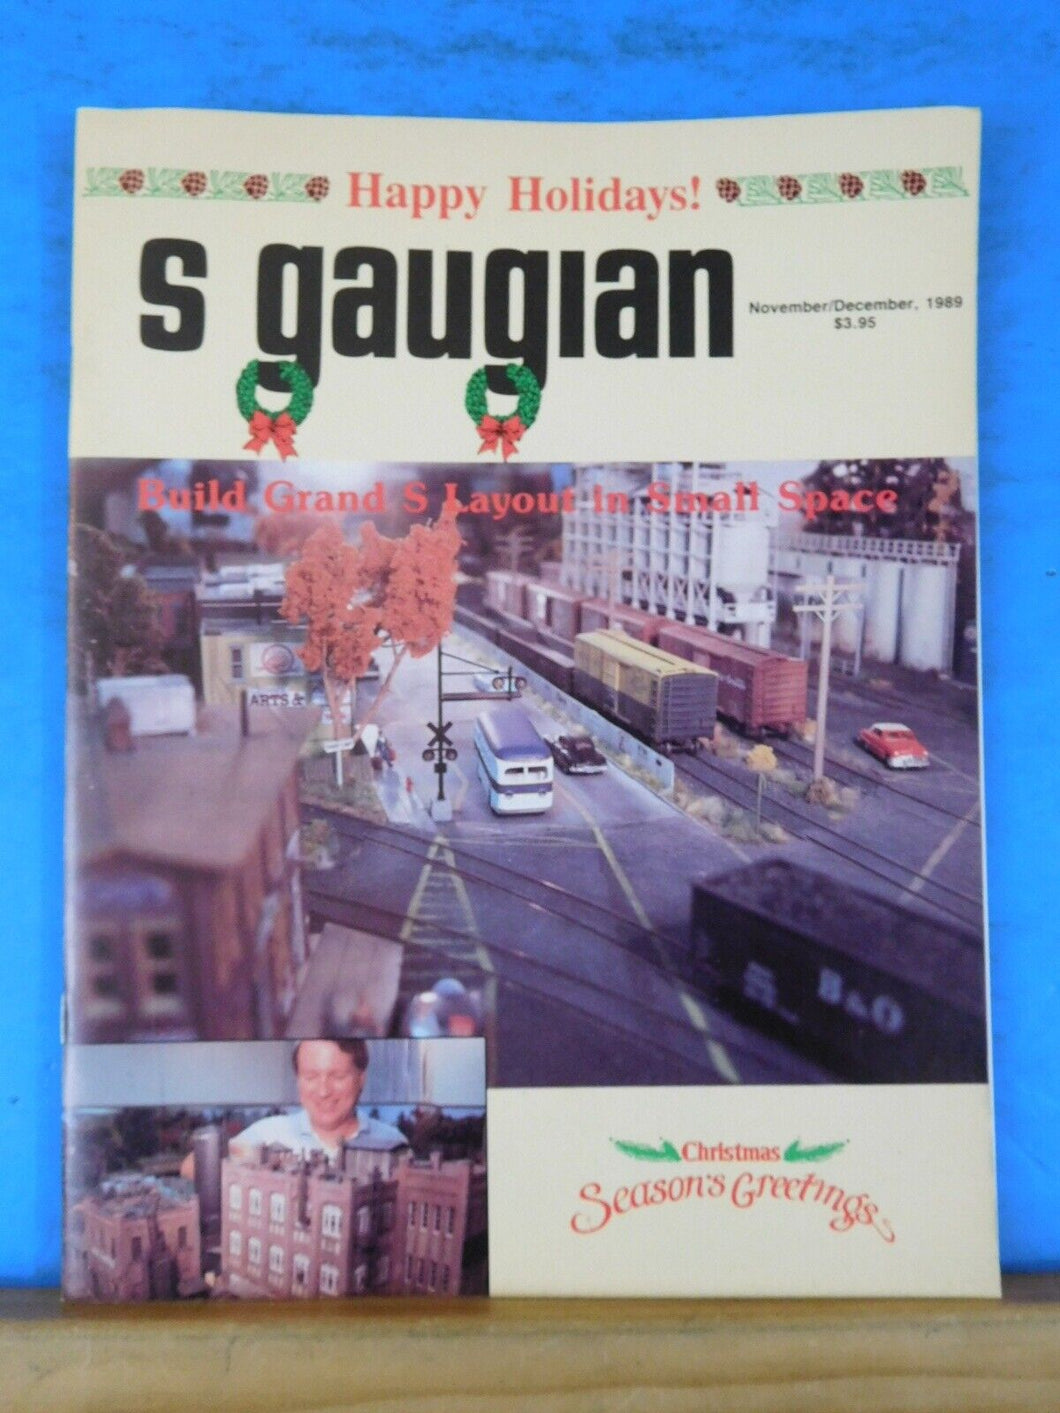 S Gaugian 1989 Nov Dec Build Grand S Layout in Small Spaces Reading GP-7